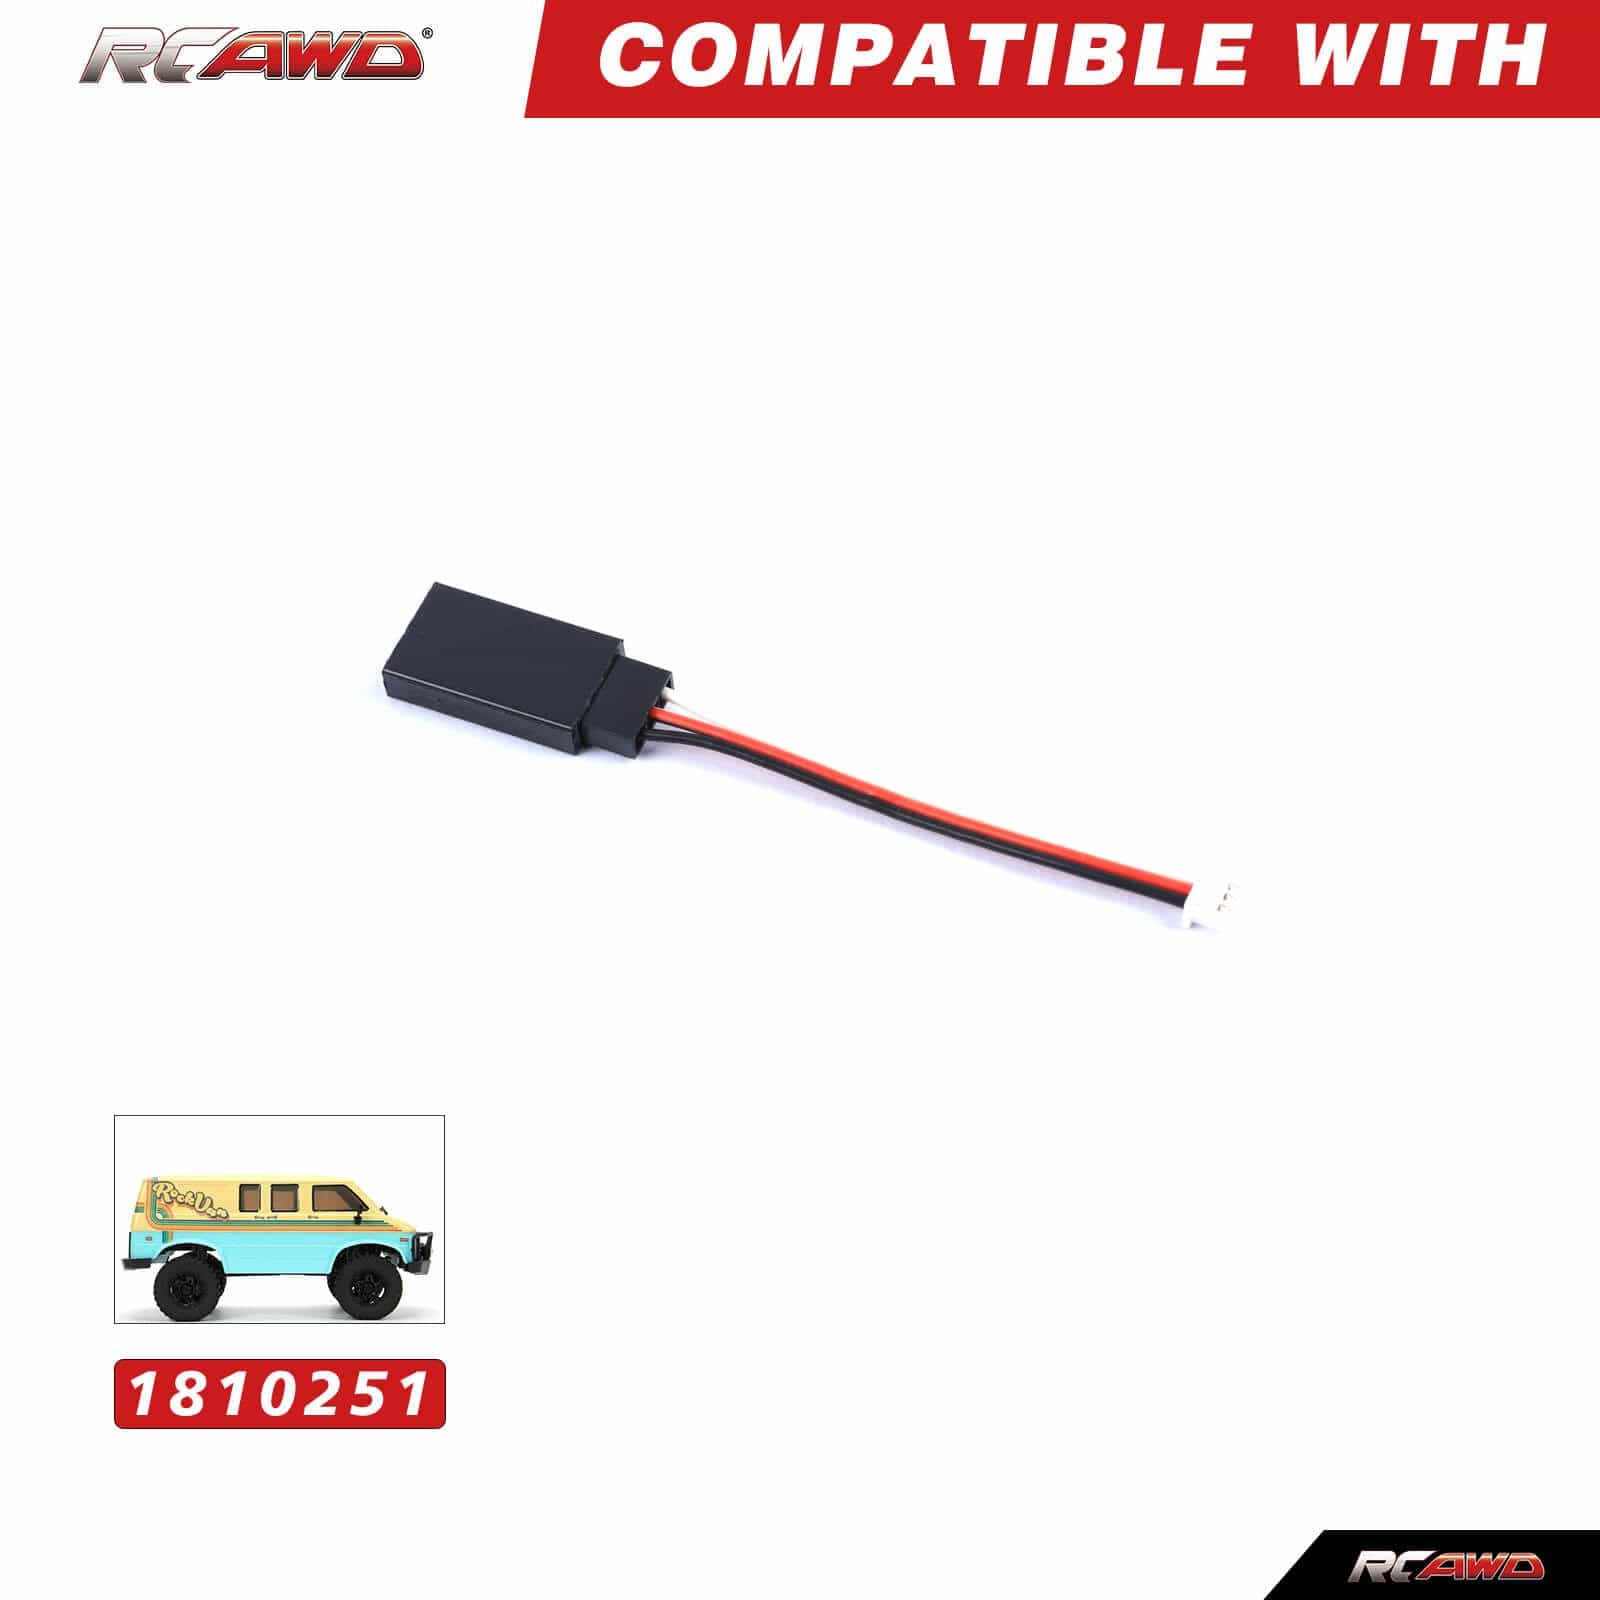 RCAWD HobbyPlus CR18P Upgrades JR Cable for Trail Hunter &Rock Van 240290 - RCAWD